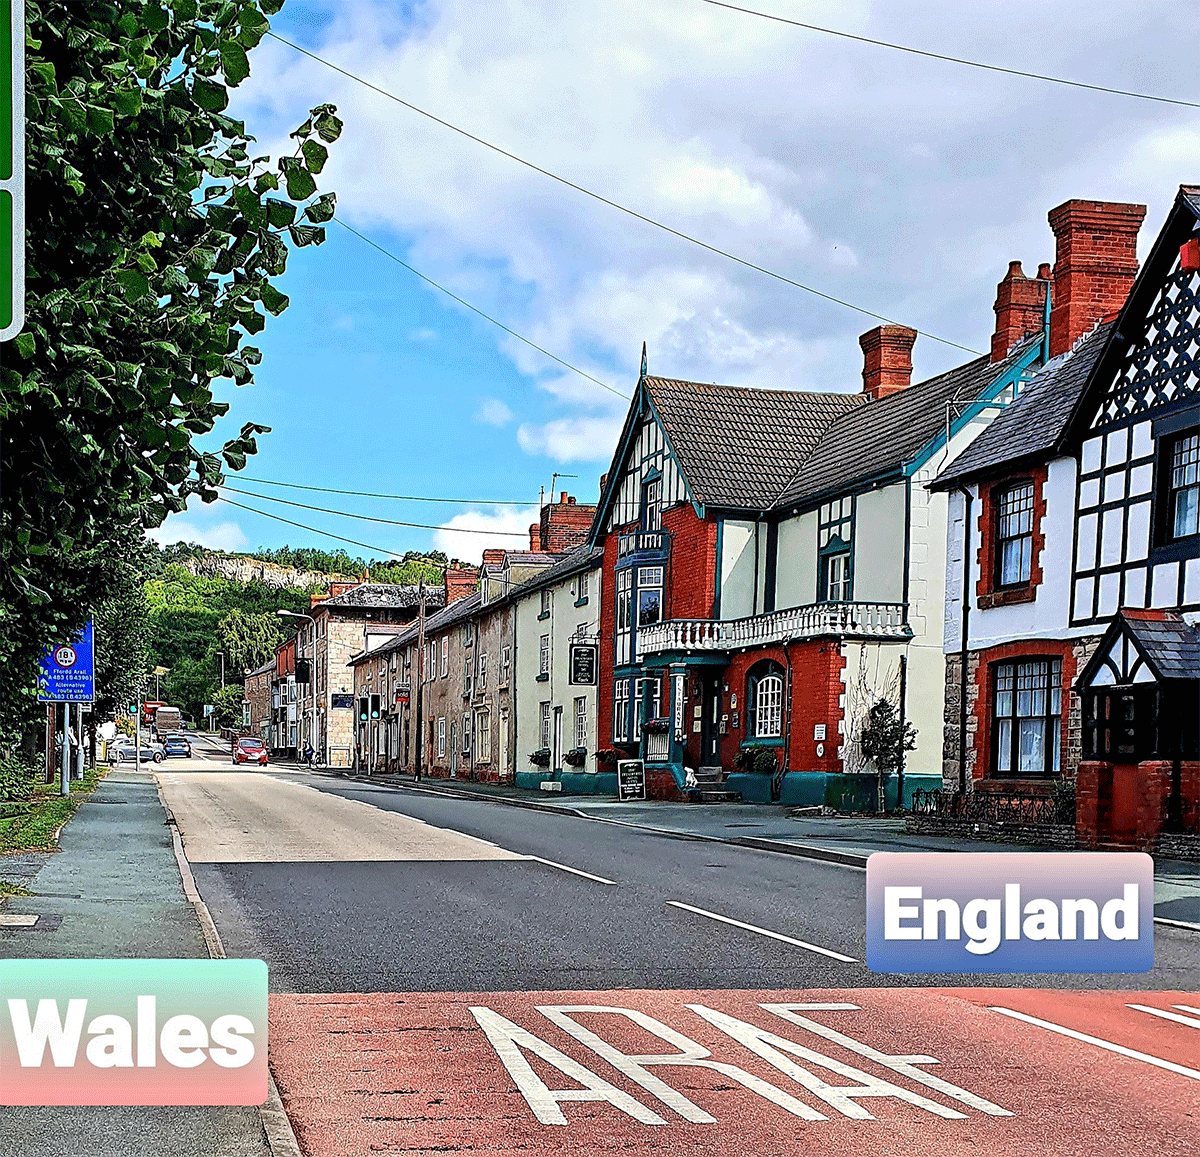 The Cross Keys pub sits on the English side of the road passing through the centre of the village, while on the opposite side is The Dolphin, from which point on everything is Welsh.